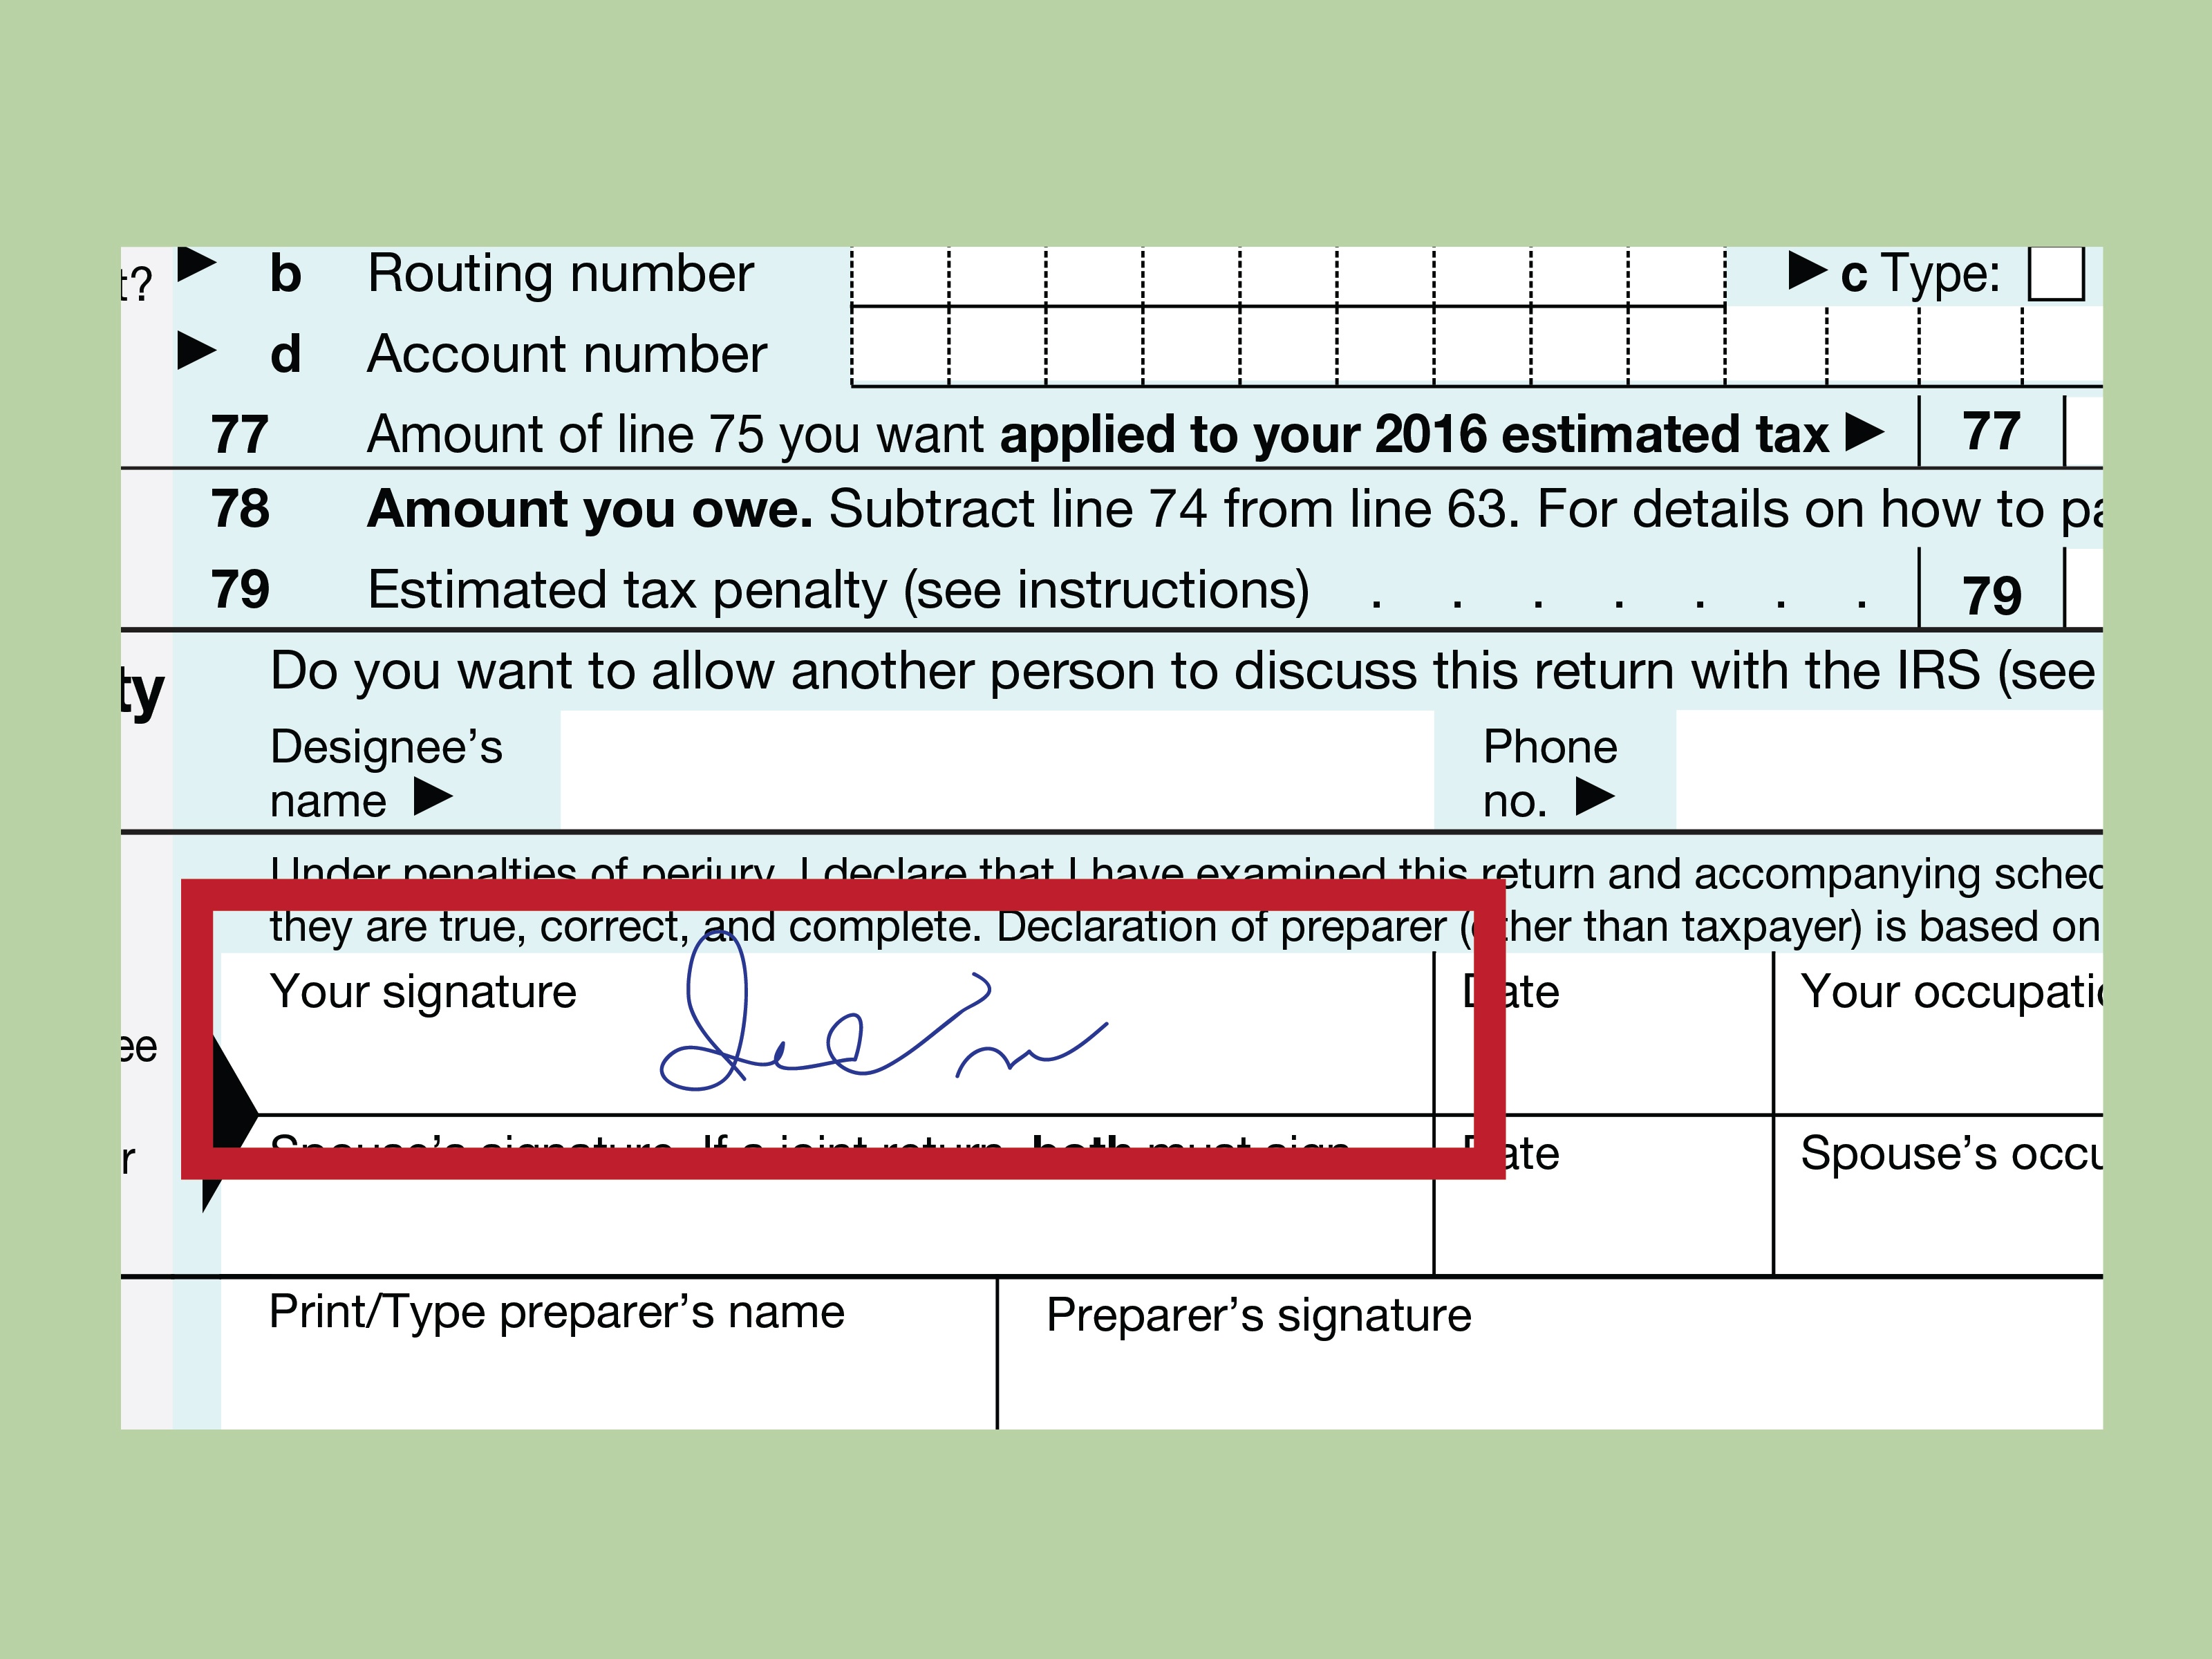 How To Fill Out Irs Form 1040 (With Form) - Wikihow - Free Printable Irs 1040 Forms